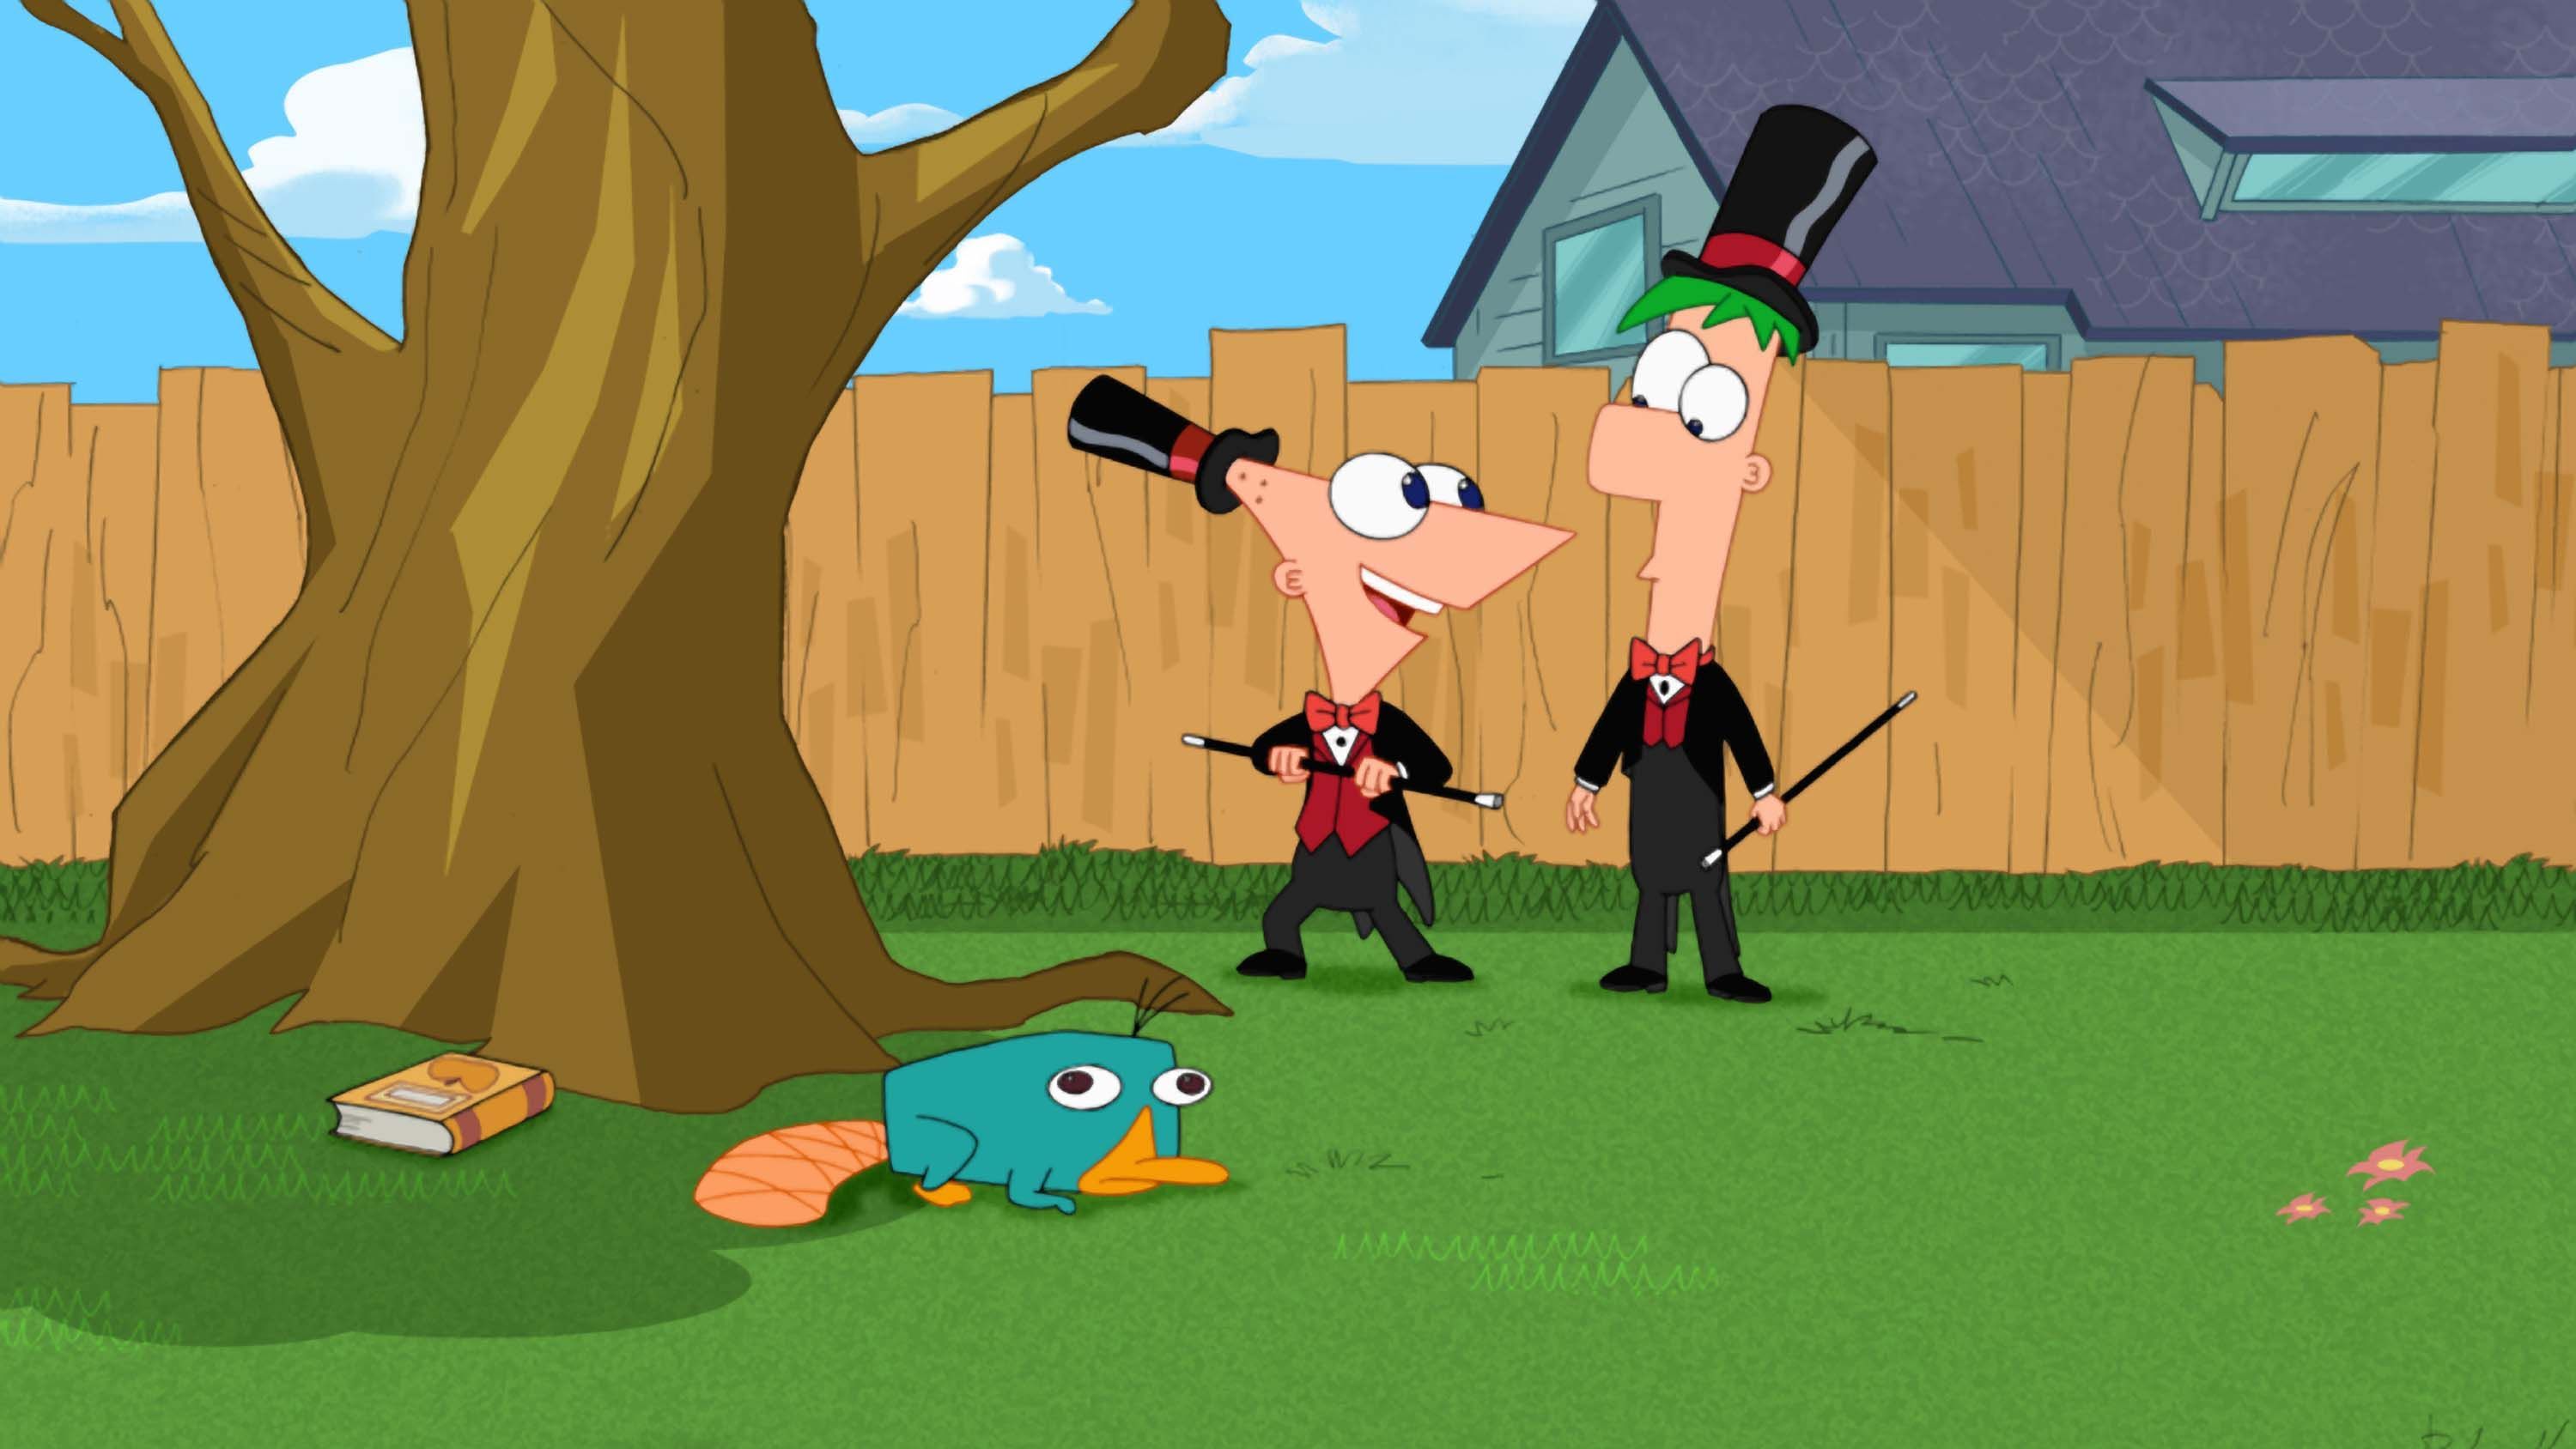 Hd Image Phineas and Ferb Wallpaper 13 - HD wallpapers backgrounds